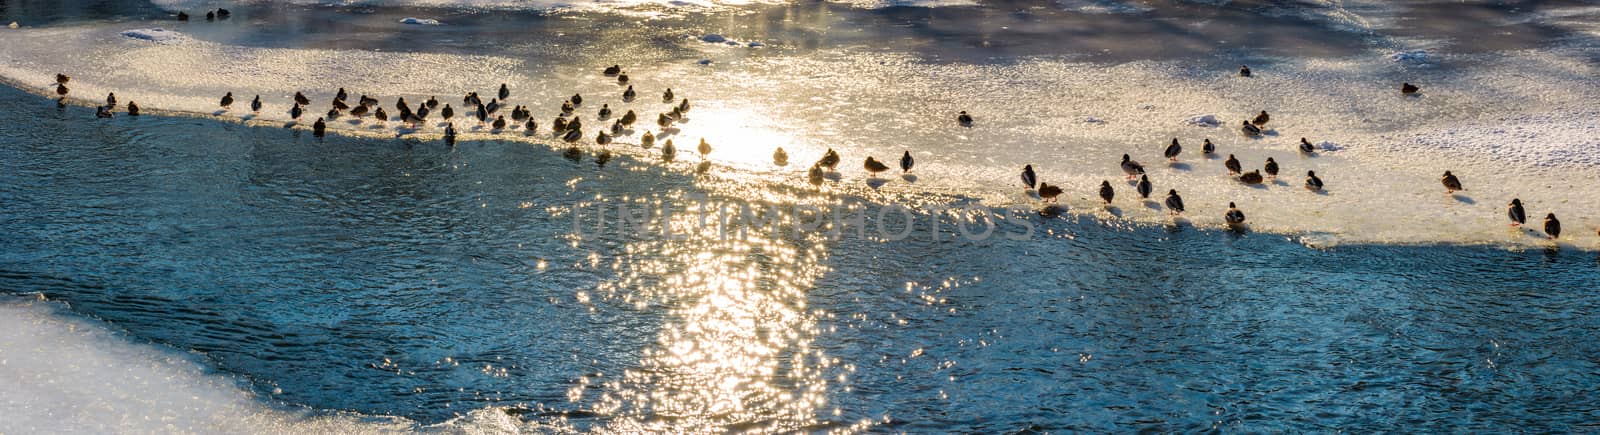 flock of ducks on the ice of frozen river by Pellinni